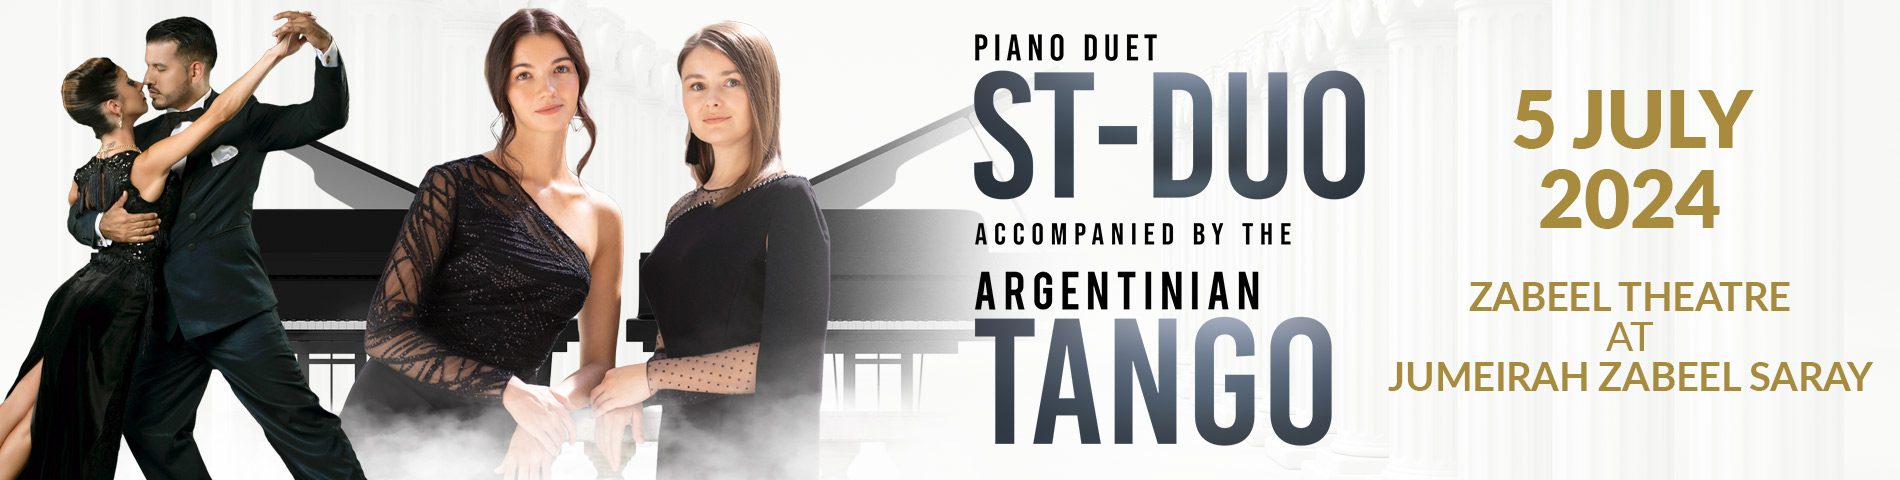 Symphonic Middle East: ST-DUO + Argentinian Tango